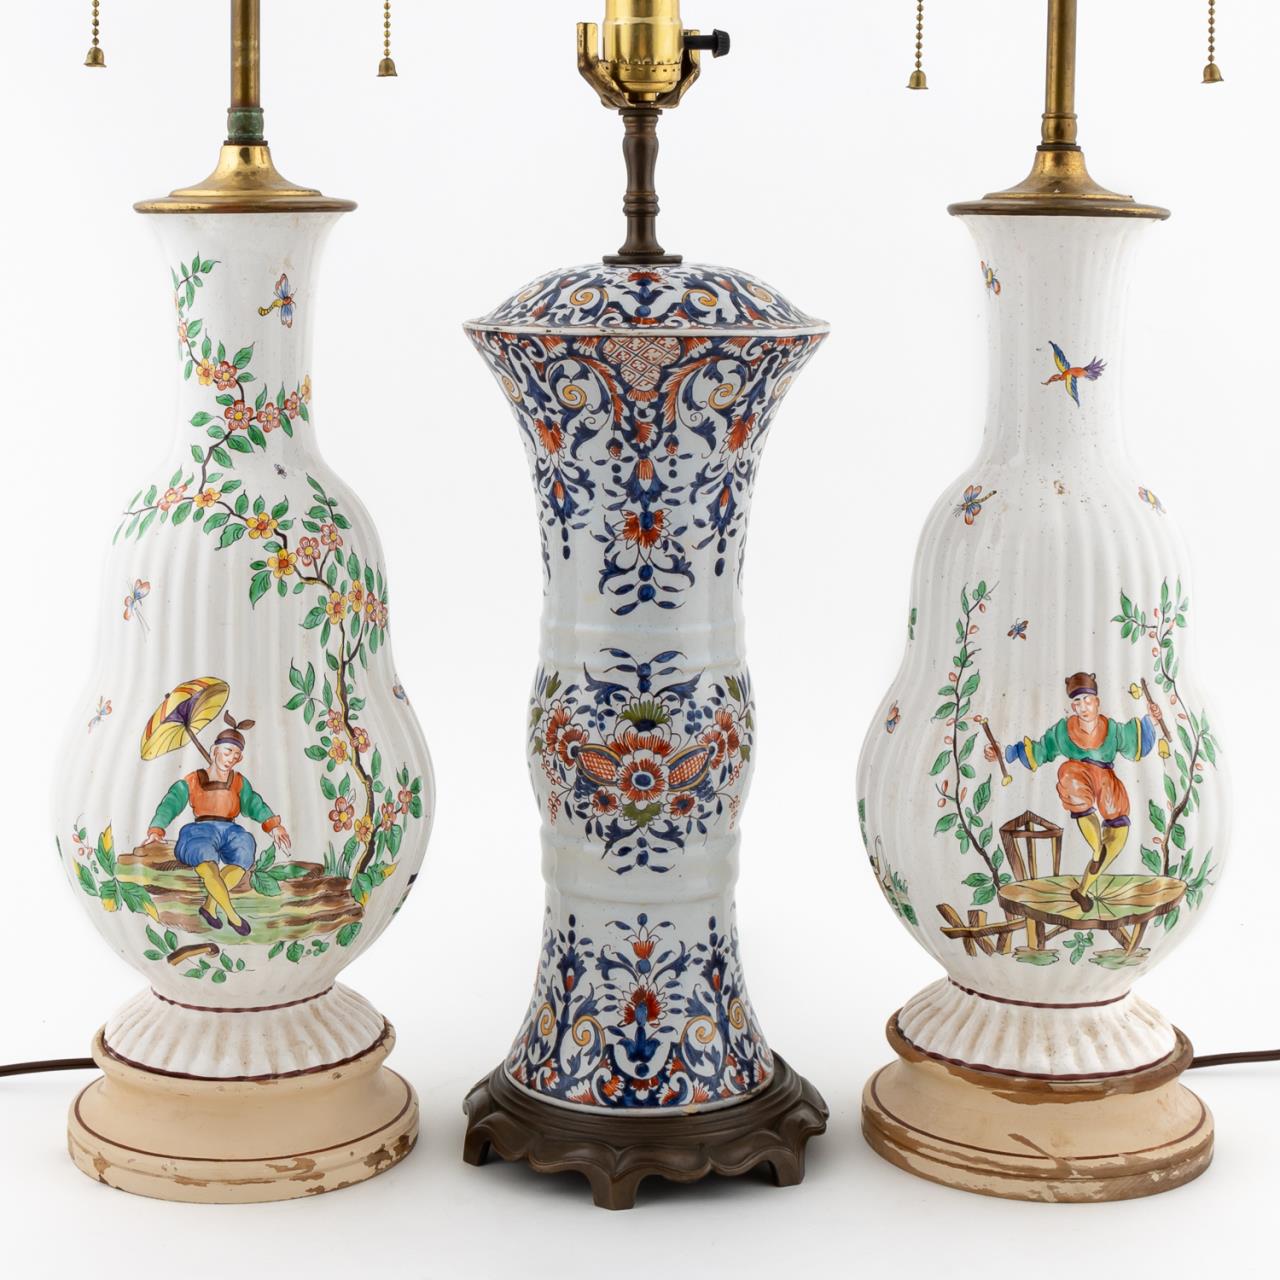 3PCS FRENCH FAIENCE TABLE LAMPS  35c583